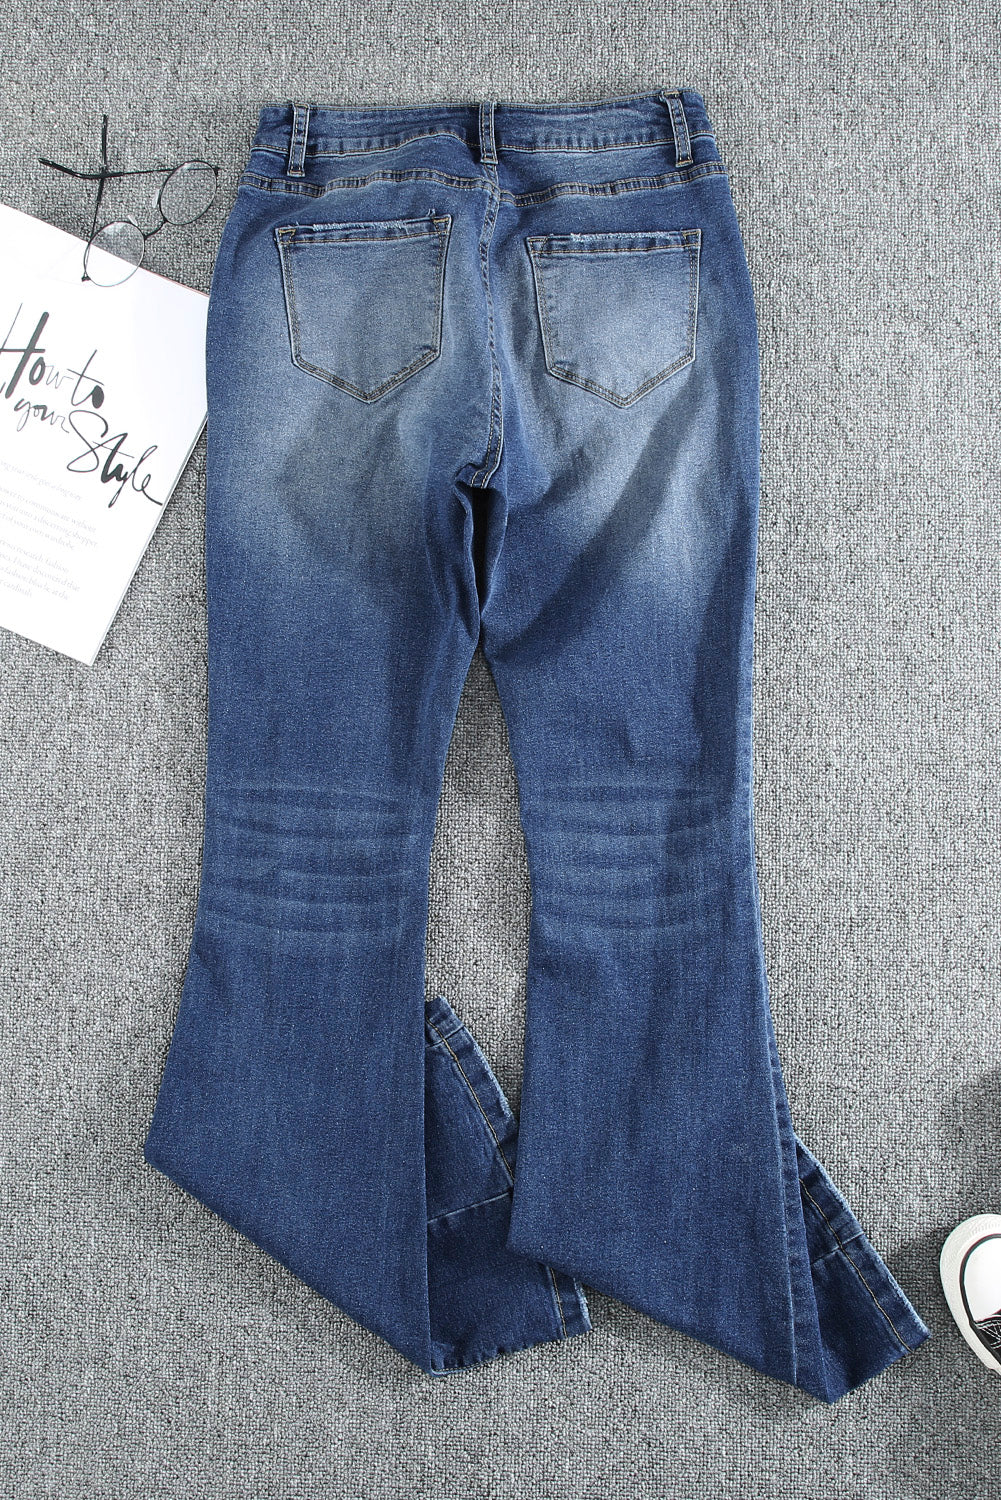 High Waist Flare Jeans with Pockets Jeans JT's Designer Fashion